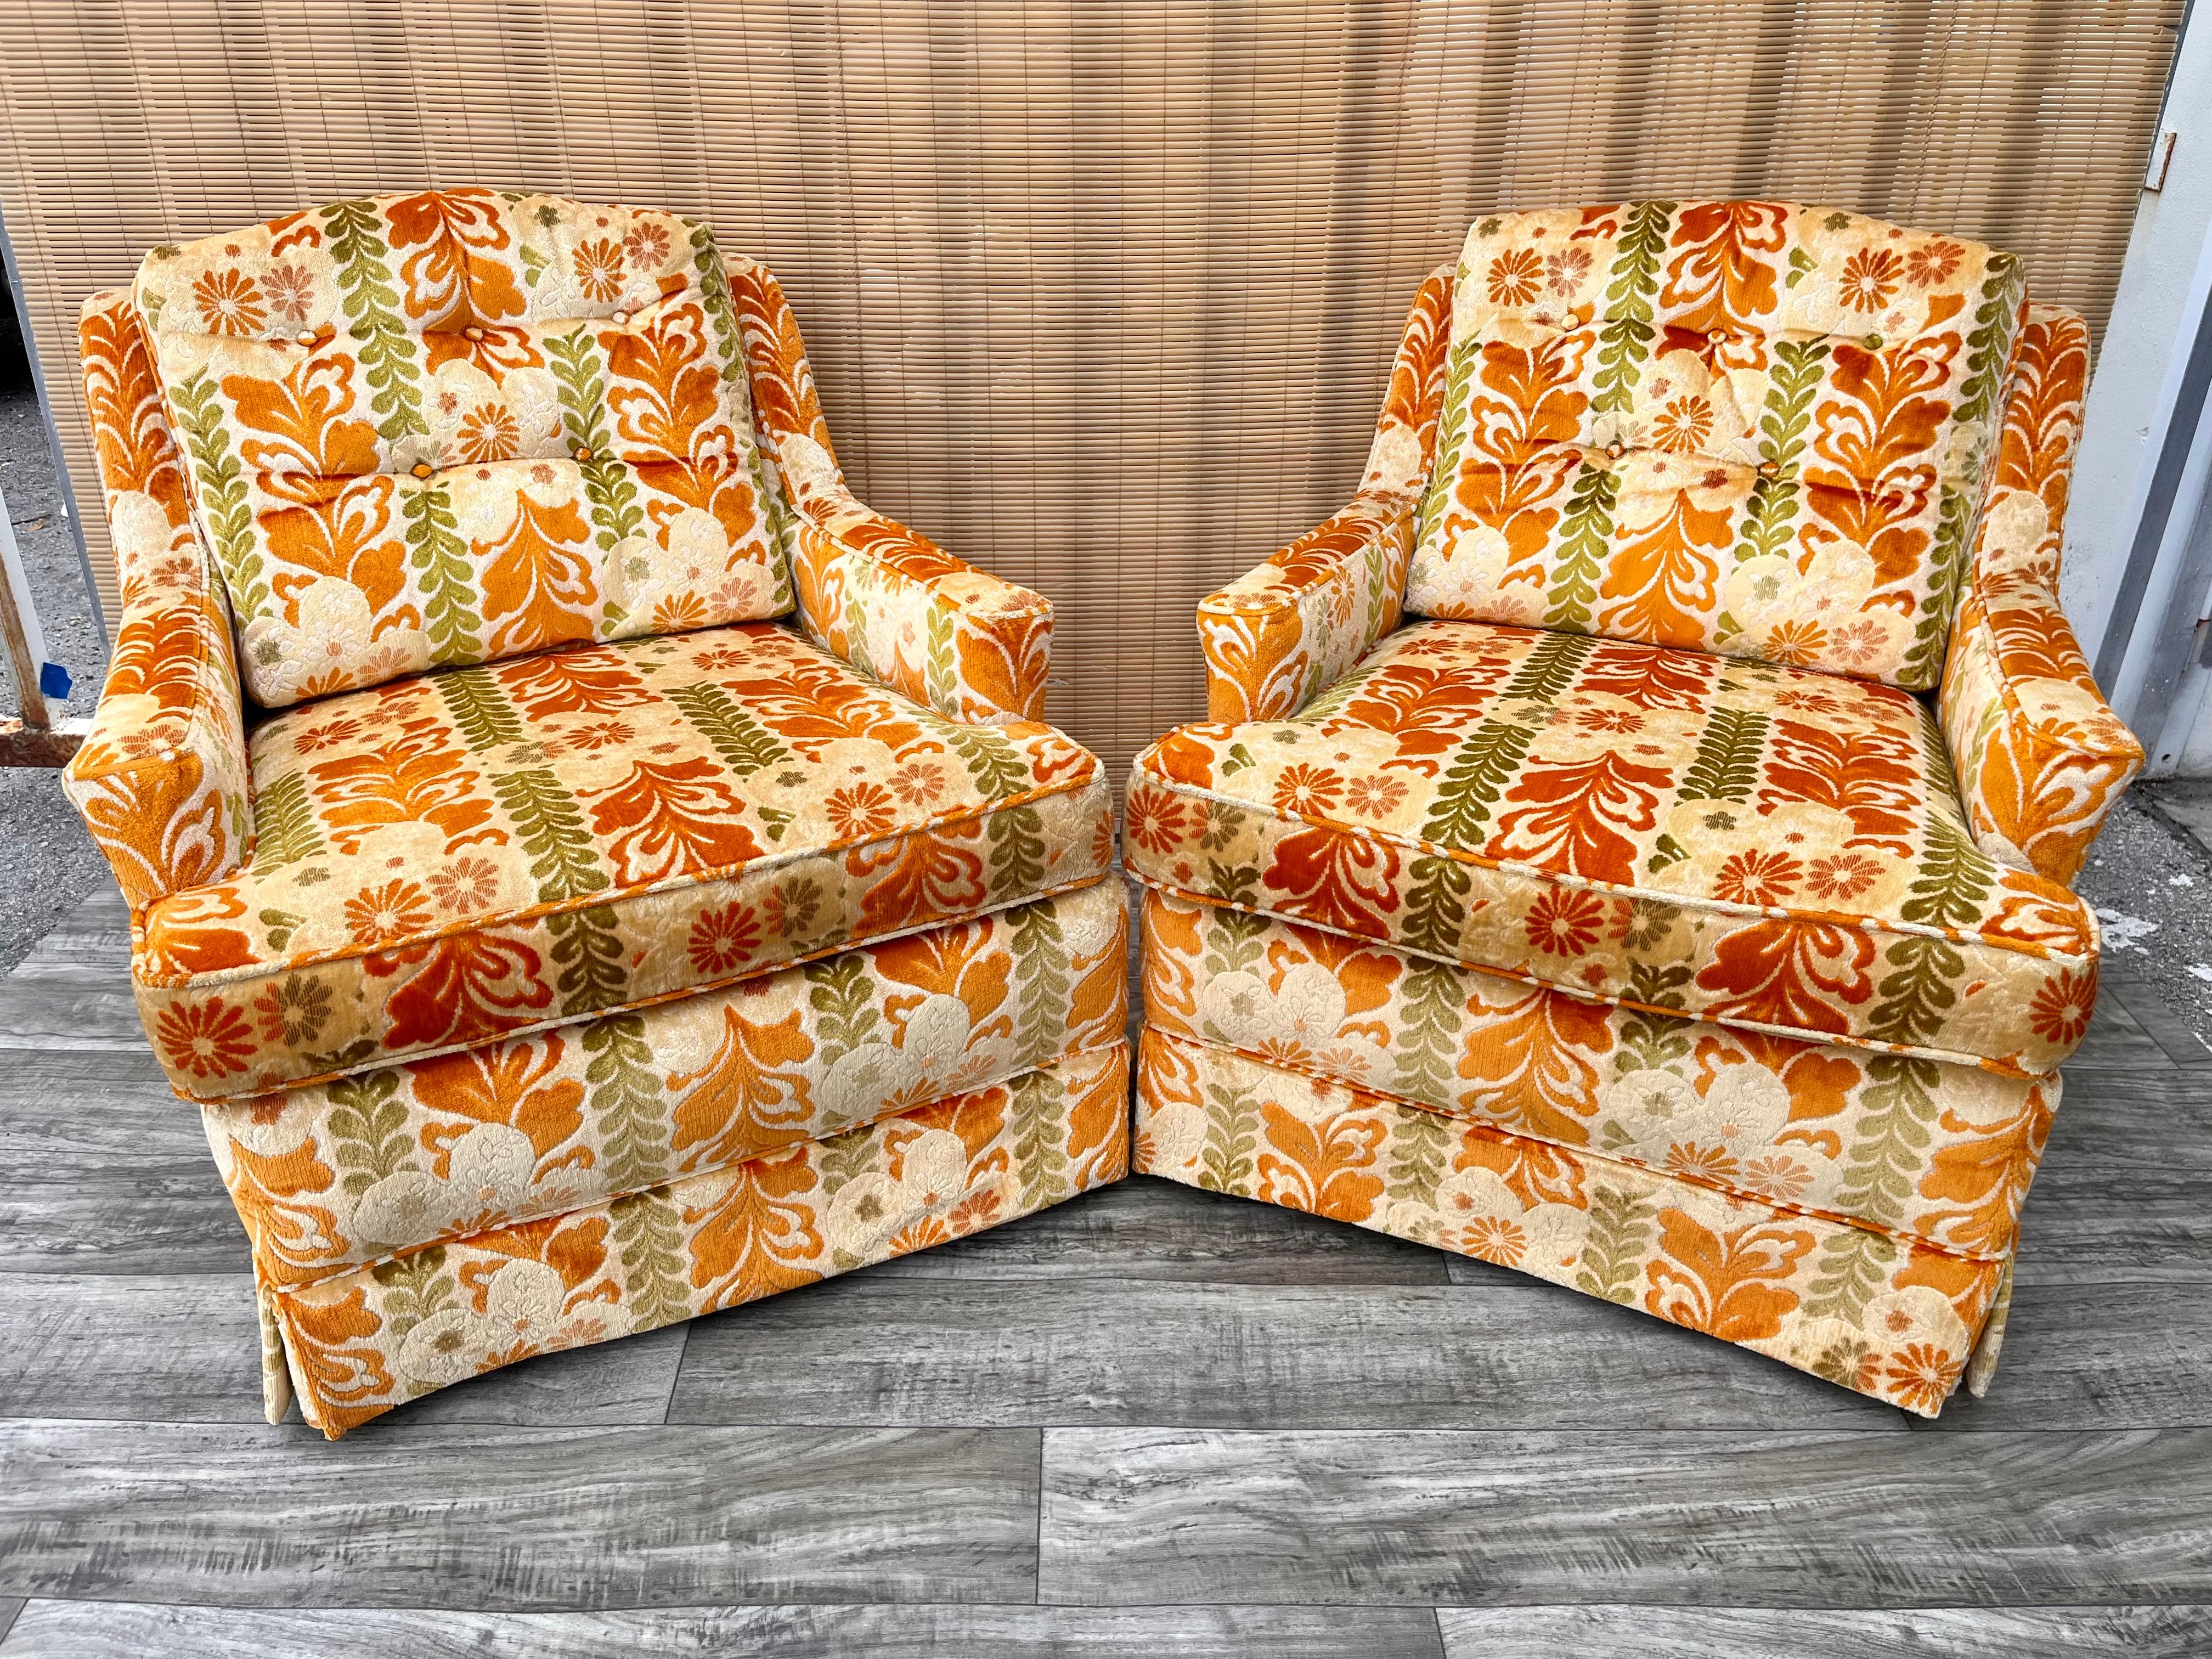 A Pair of Vintage Mid Century Modern / Hollywood Regency Upholstered Lounge Chairs by Highland House of Hickory. Circa 1960s 
Feature the original velvet earth tones floral upholstery, Mid Century Modern tapered legs, and Removable seat and back